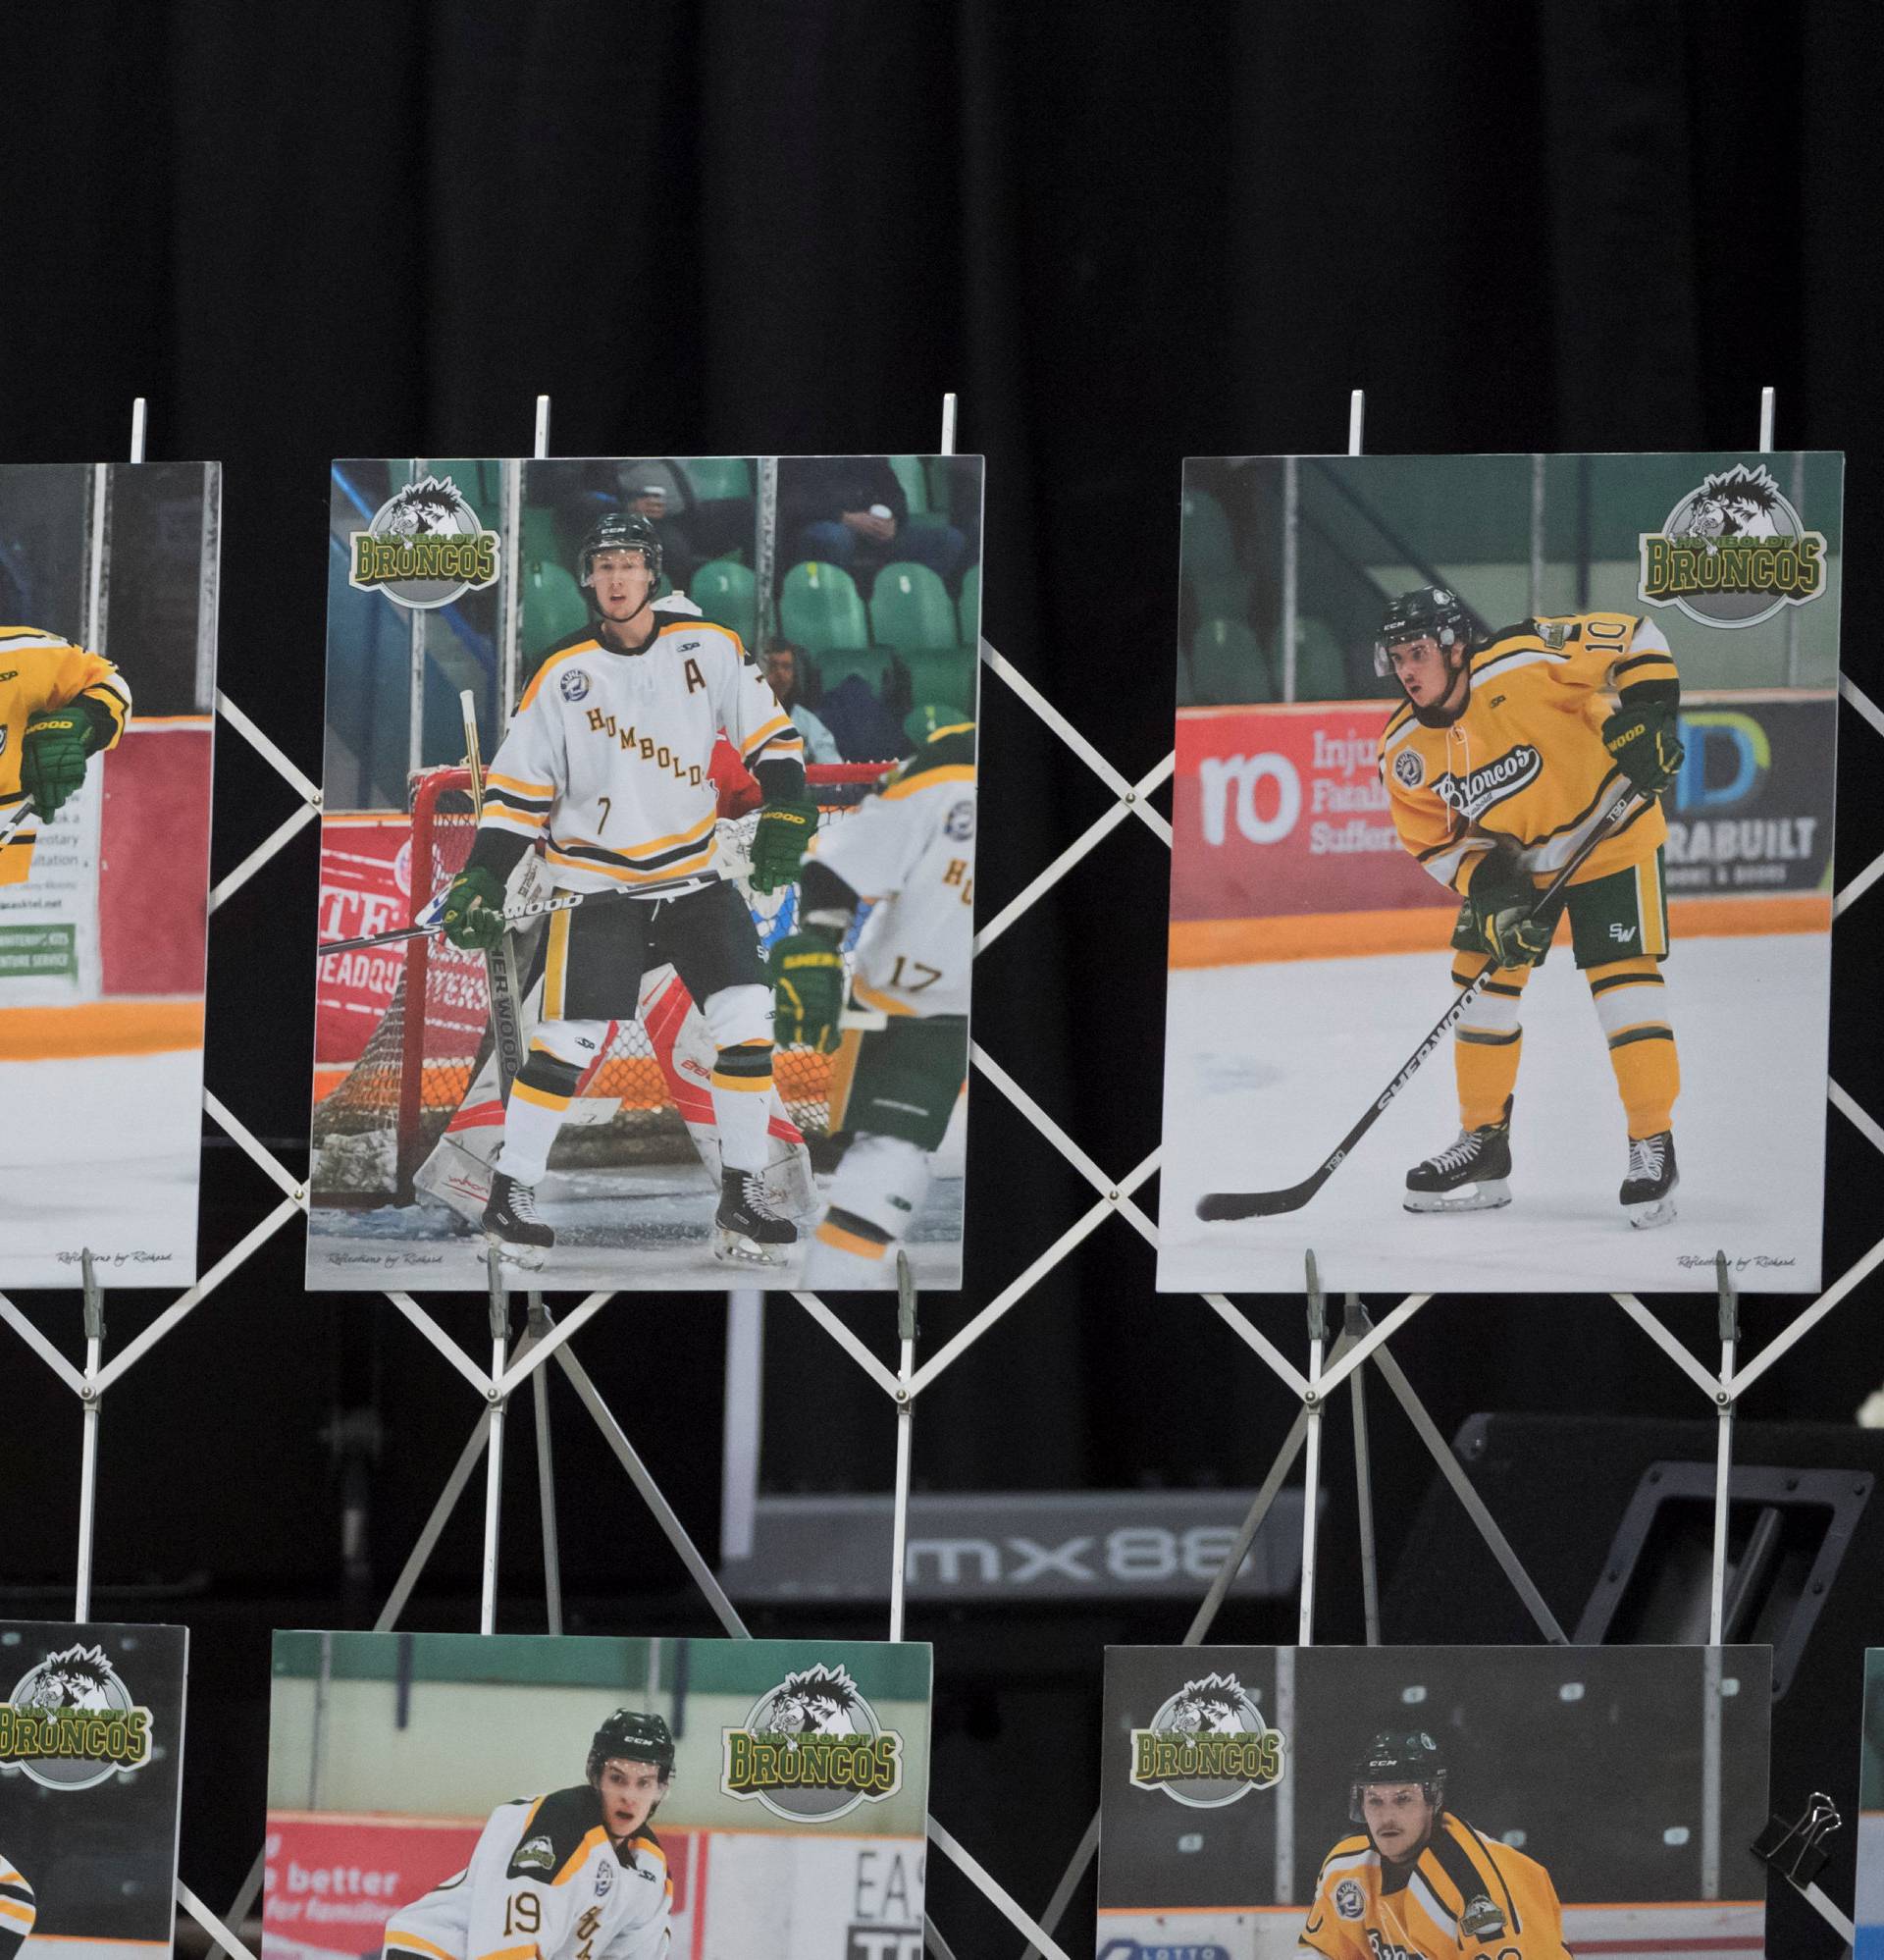 A man reacts as he looks at photographs before a vigil at the Elgar Petersen Arena, home of the Humboldt Broncos, to honour the victims of a fatal bus accident in Humboldt